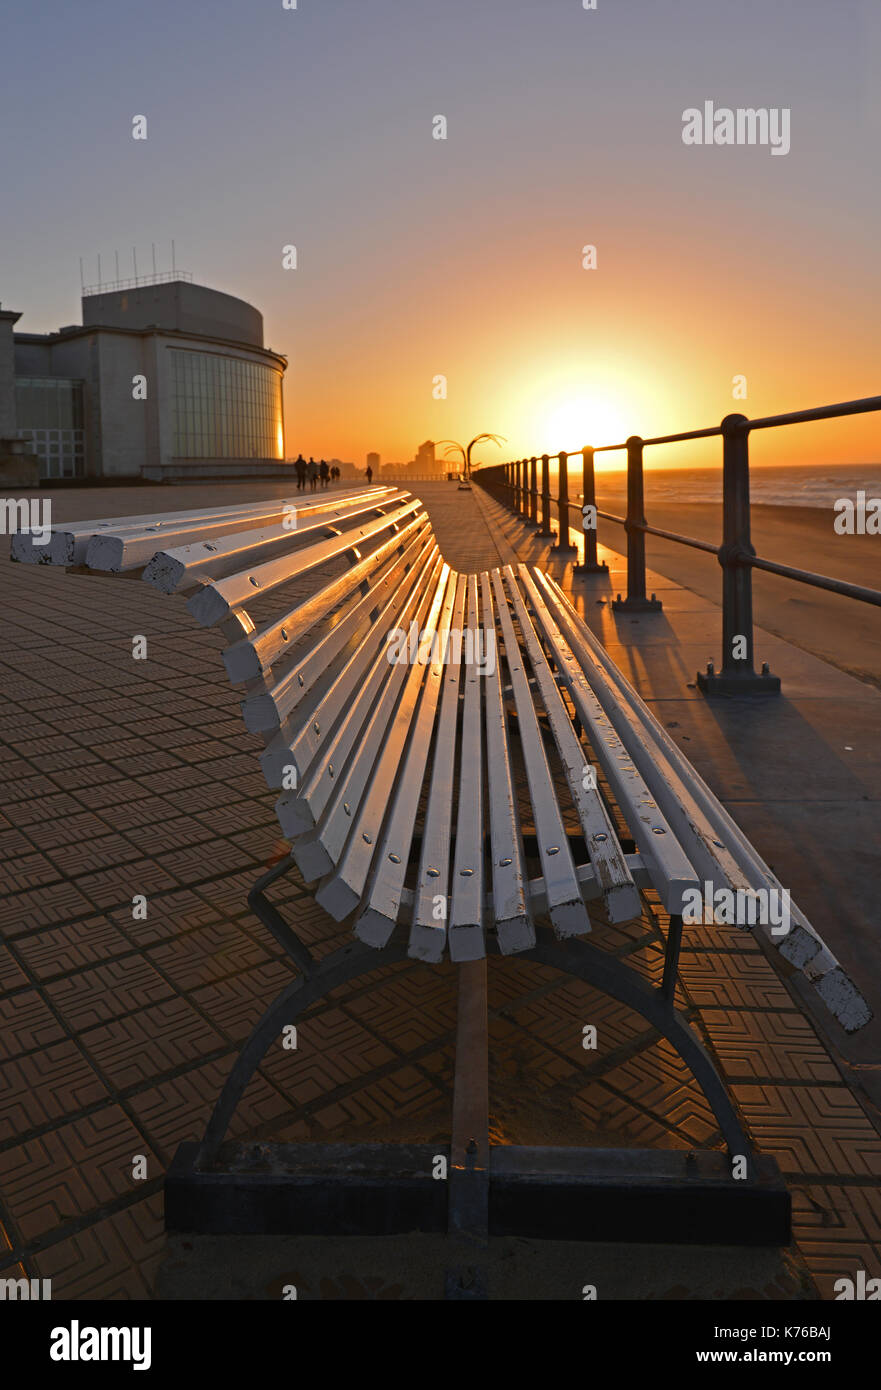 Sunset along the waterfront promenade with a bench in the foreground in Ostend by its North Sea beach with a skyline view in the background, Belgium. Stock Photo